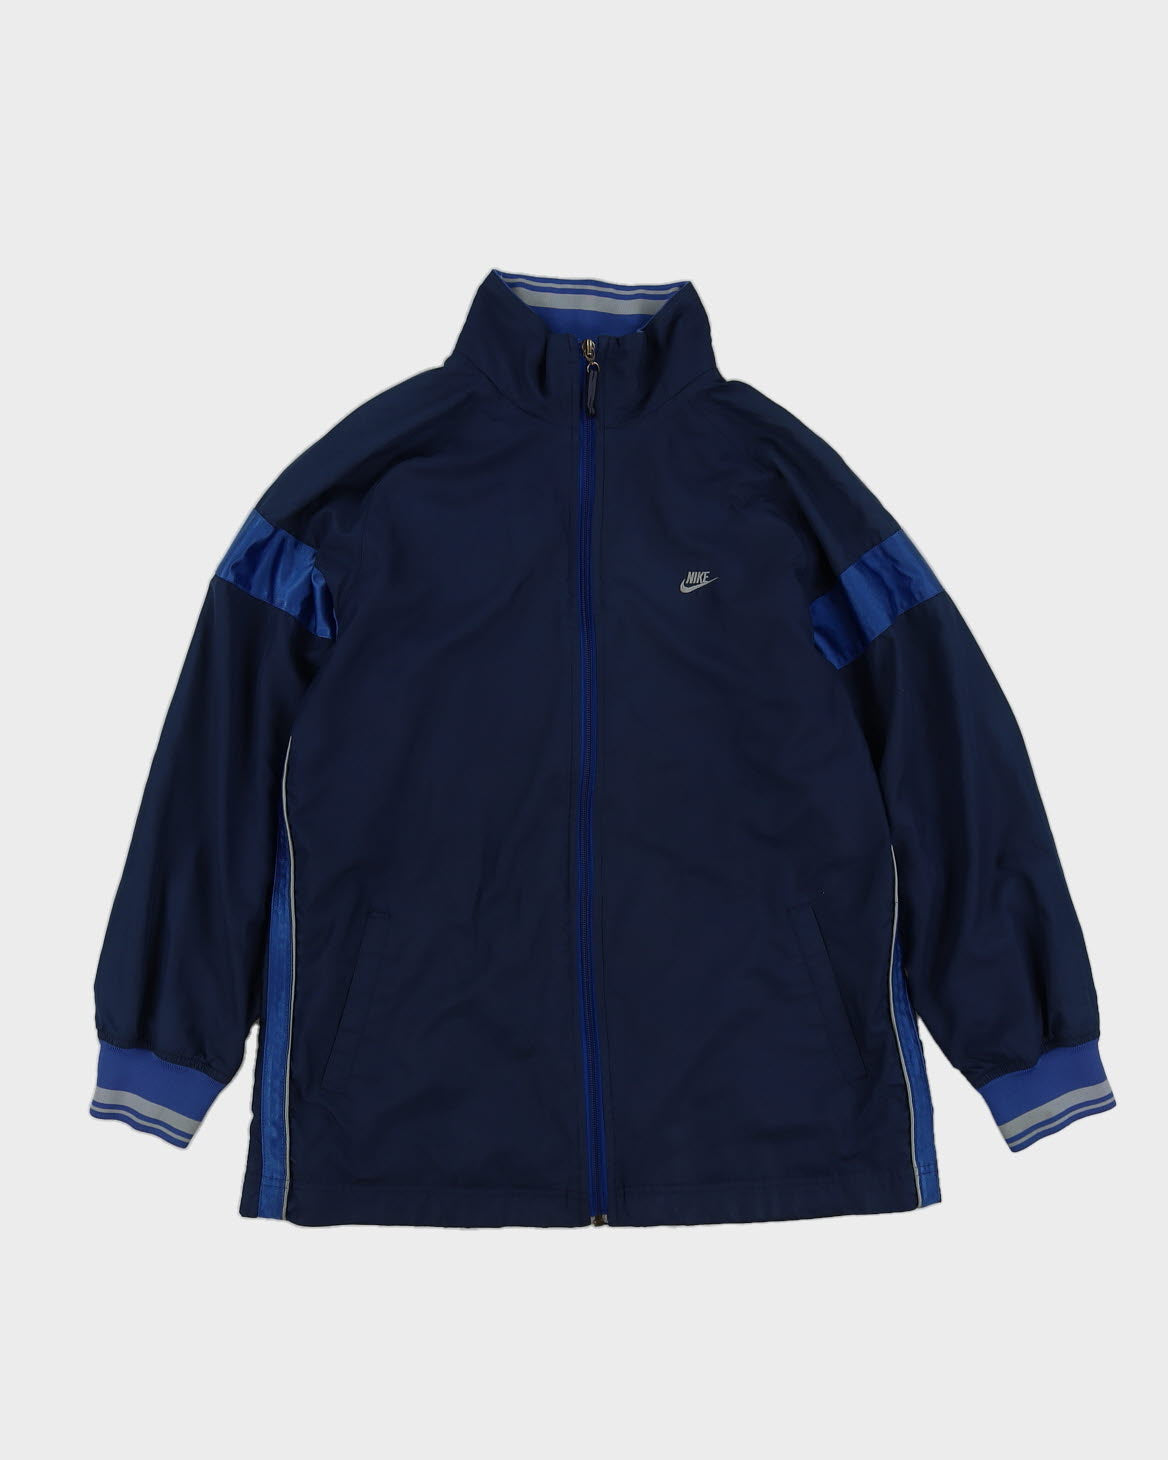 00s Y2K Nike Blue Track Jacket With Big Embroidery On The Back - M